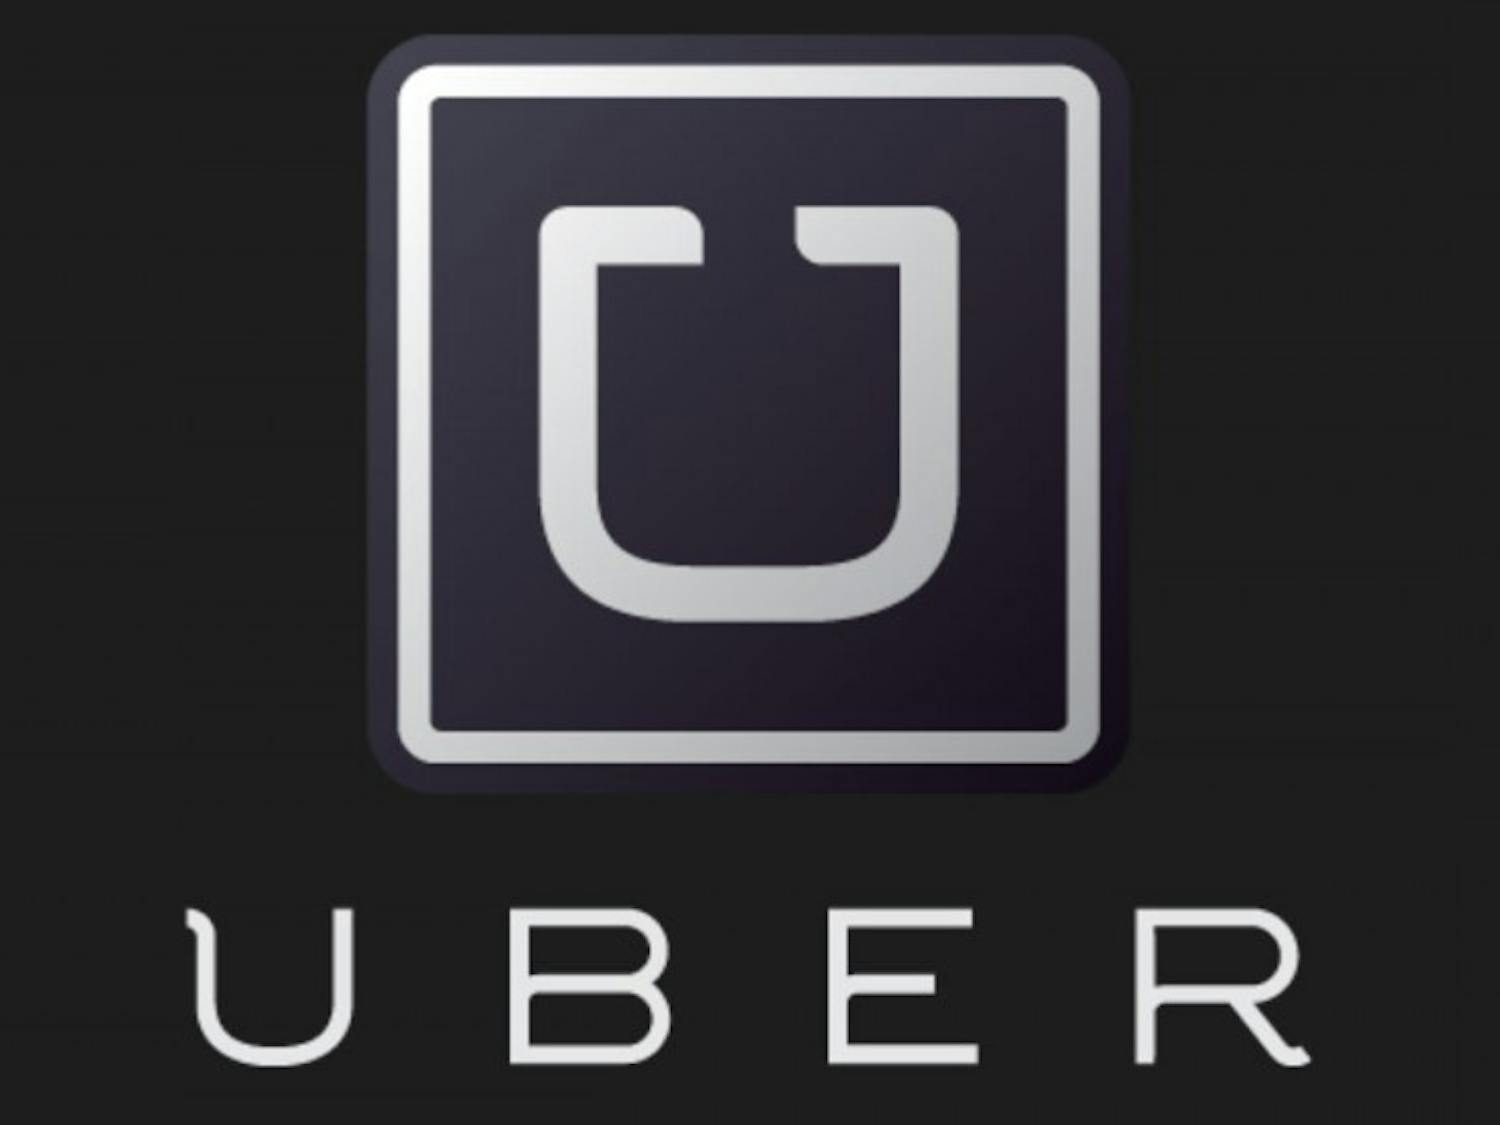 Uber, a taxi service that allows students to make arrangements straight from their phone, track their ride and pay via the app, is coming to Buffalo. The service is popular in other college towns and major cities.